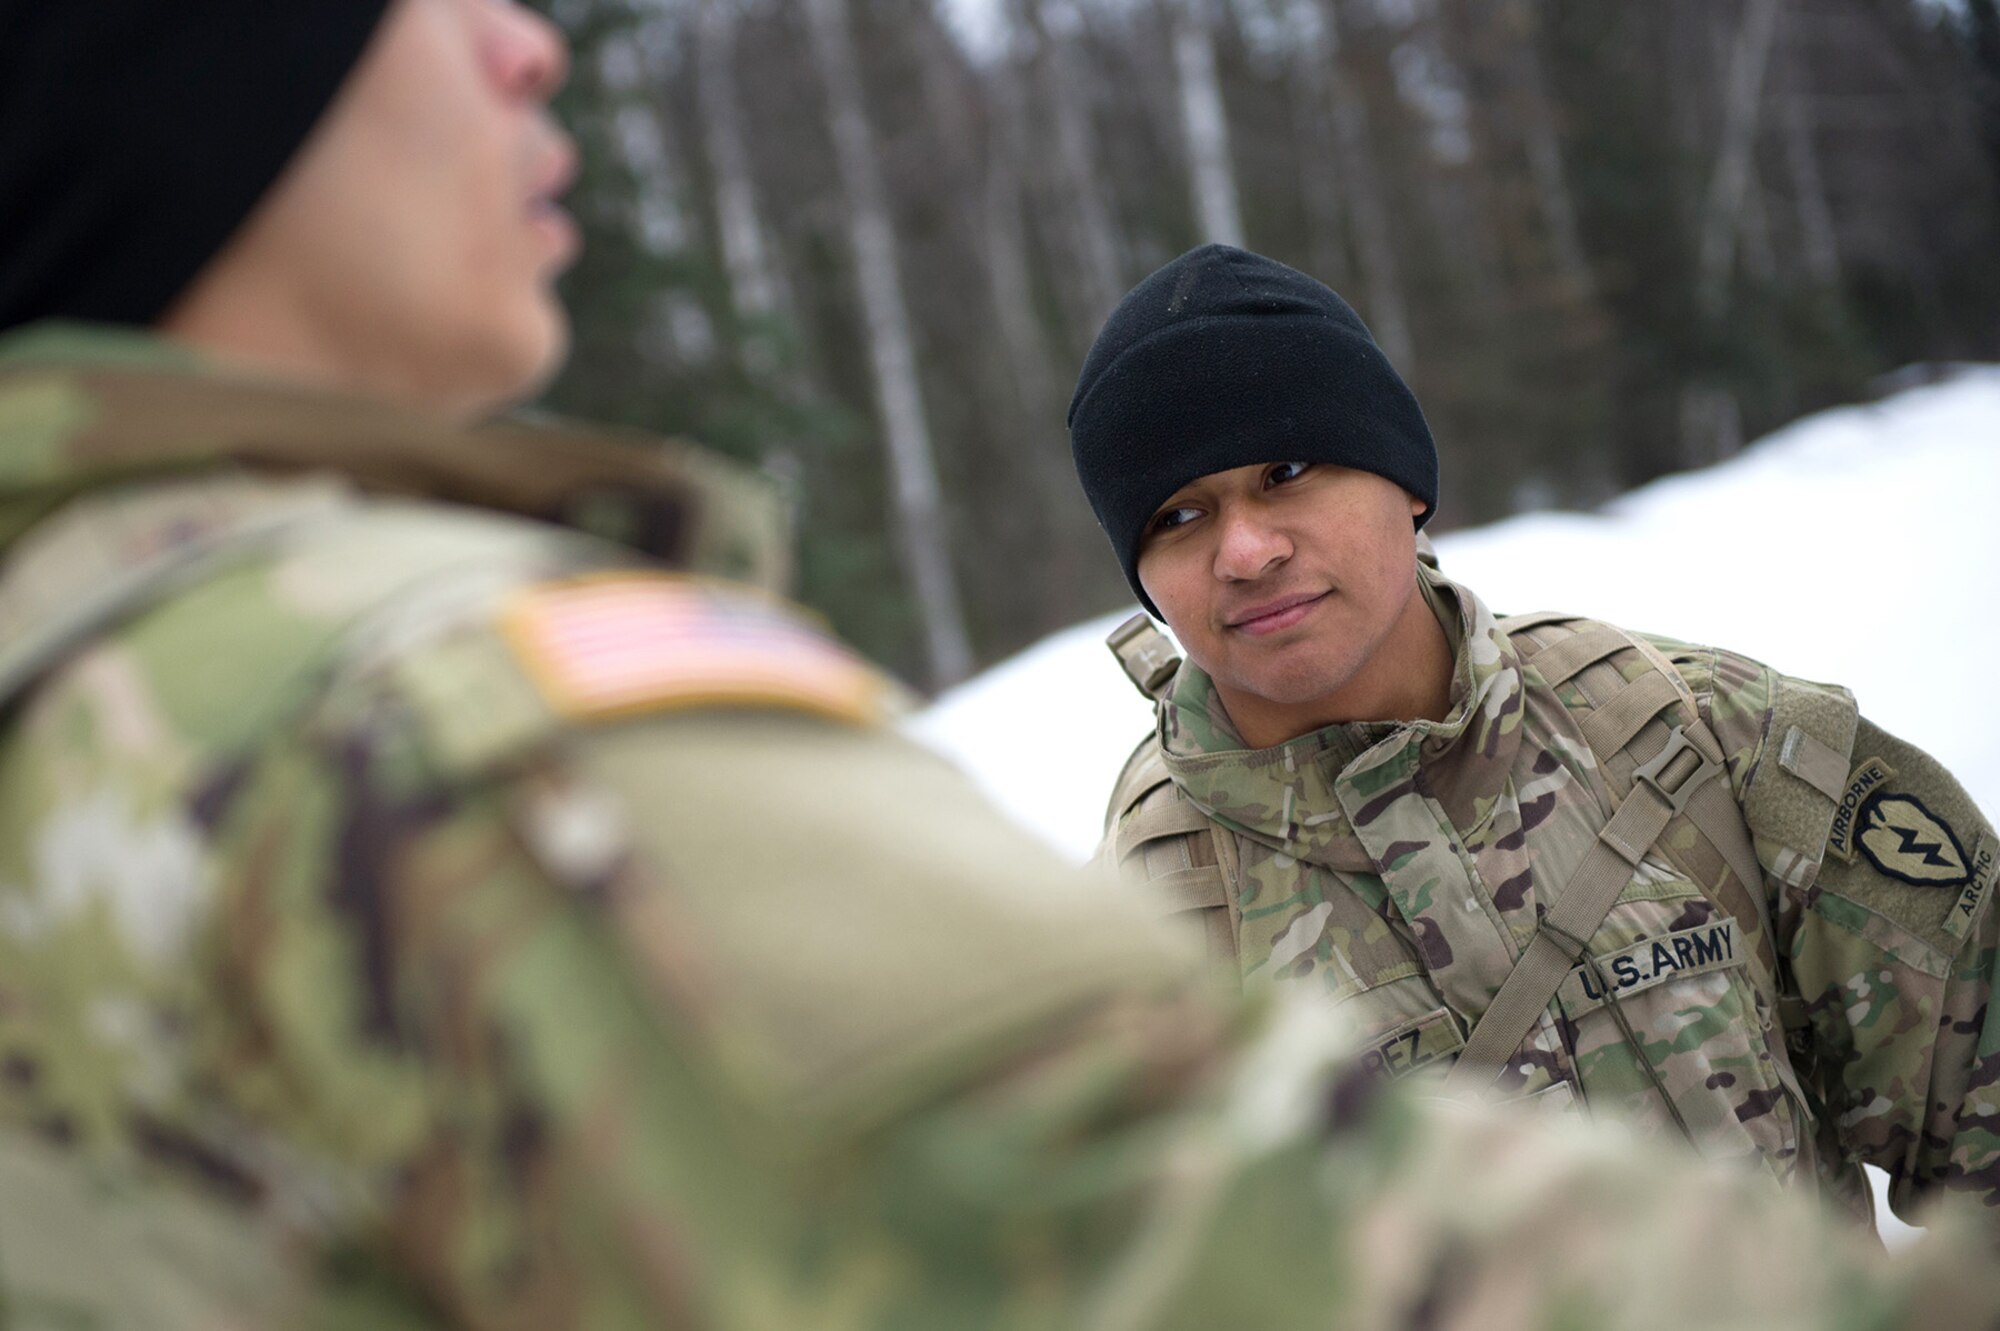 Army Sgt. Aldo Nevarez, a native of San Diego, Calif., assigned to Hawk Company, 4th Infantry Brigade Combat Team (Airborne), 25th Infantry Division, U.S. Army Alaska, listens to a fellow soldier while conducting a land navigation course on Joint Base Elmendorf-Richardson, Alaska, April 4, 2018.  The Soldiers used their skills to plot courses using a lensatic compass, protractor, and a 1:25,000 scale map to navigate to, and locate points using provided grid coordinates within a predetermined time.